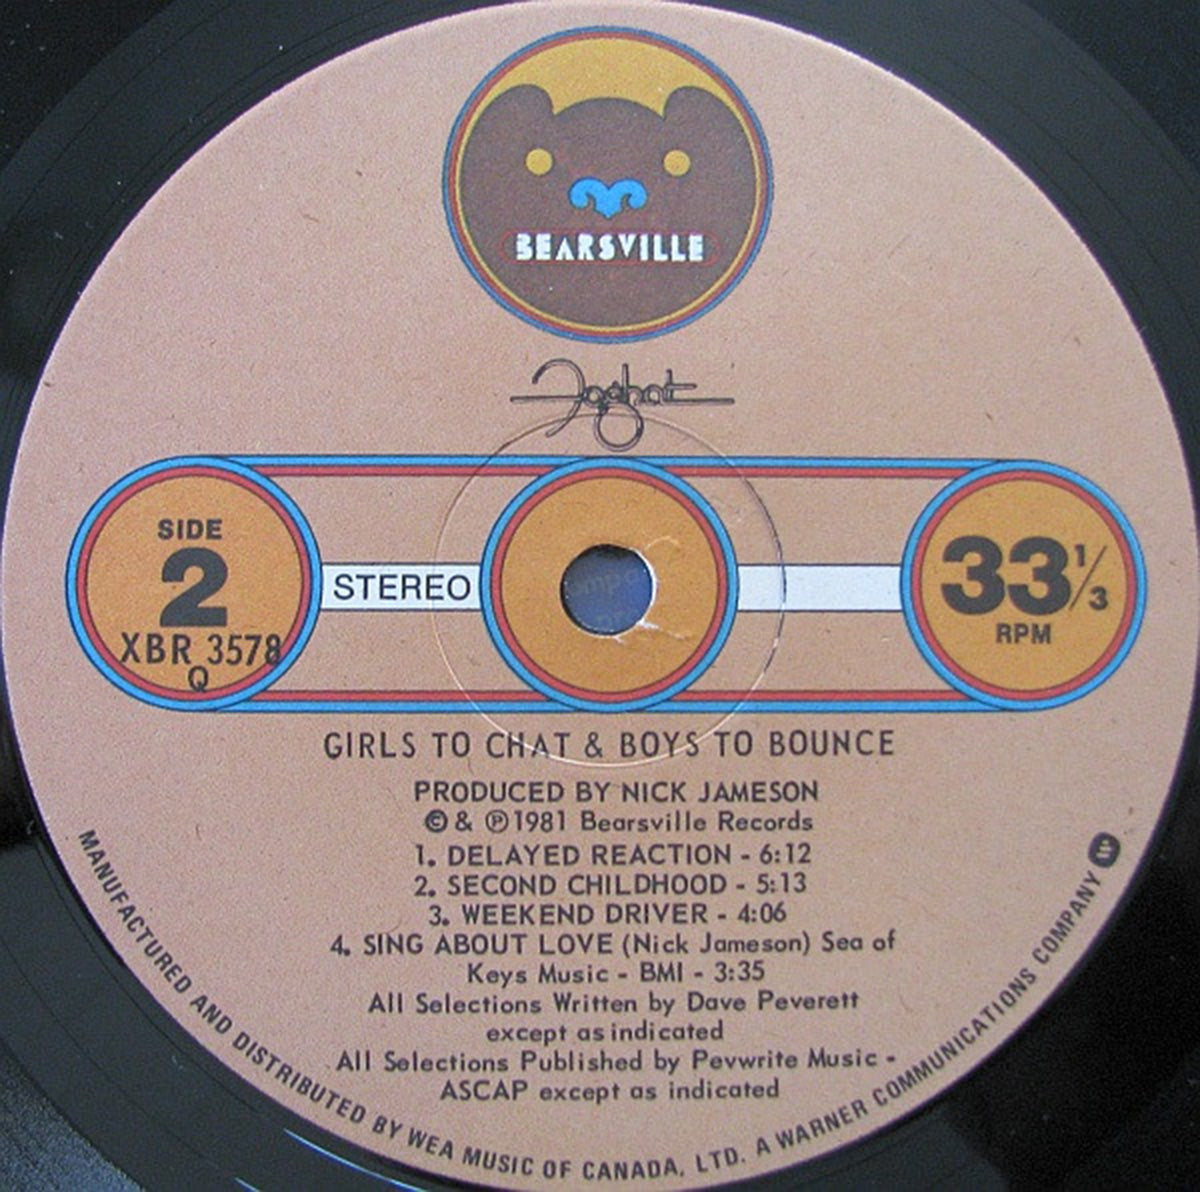 Foghat – Girls To Chat & Boys To Bounce - 1981